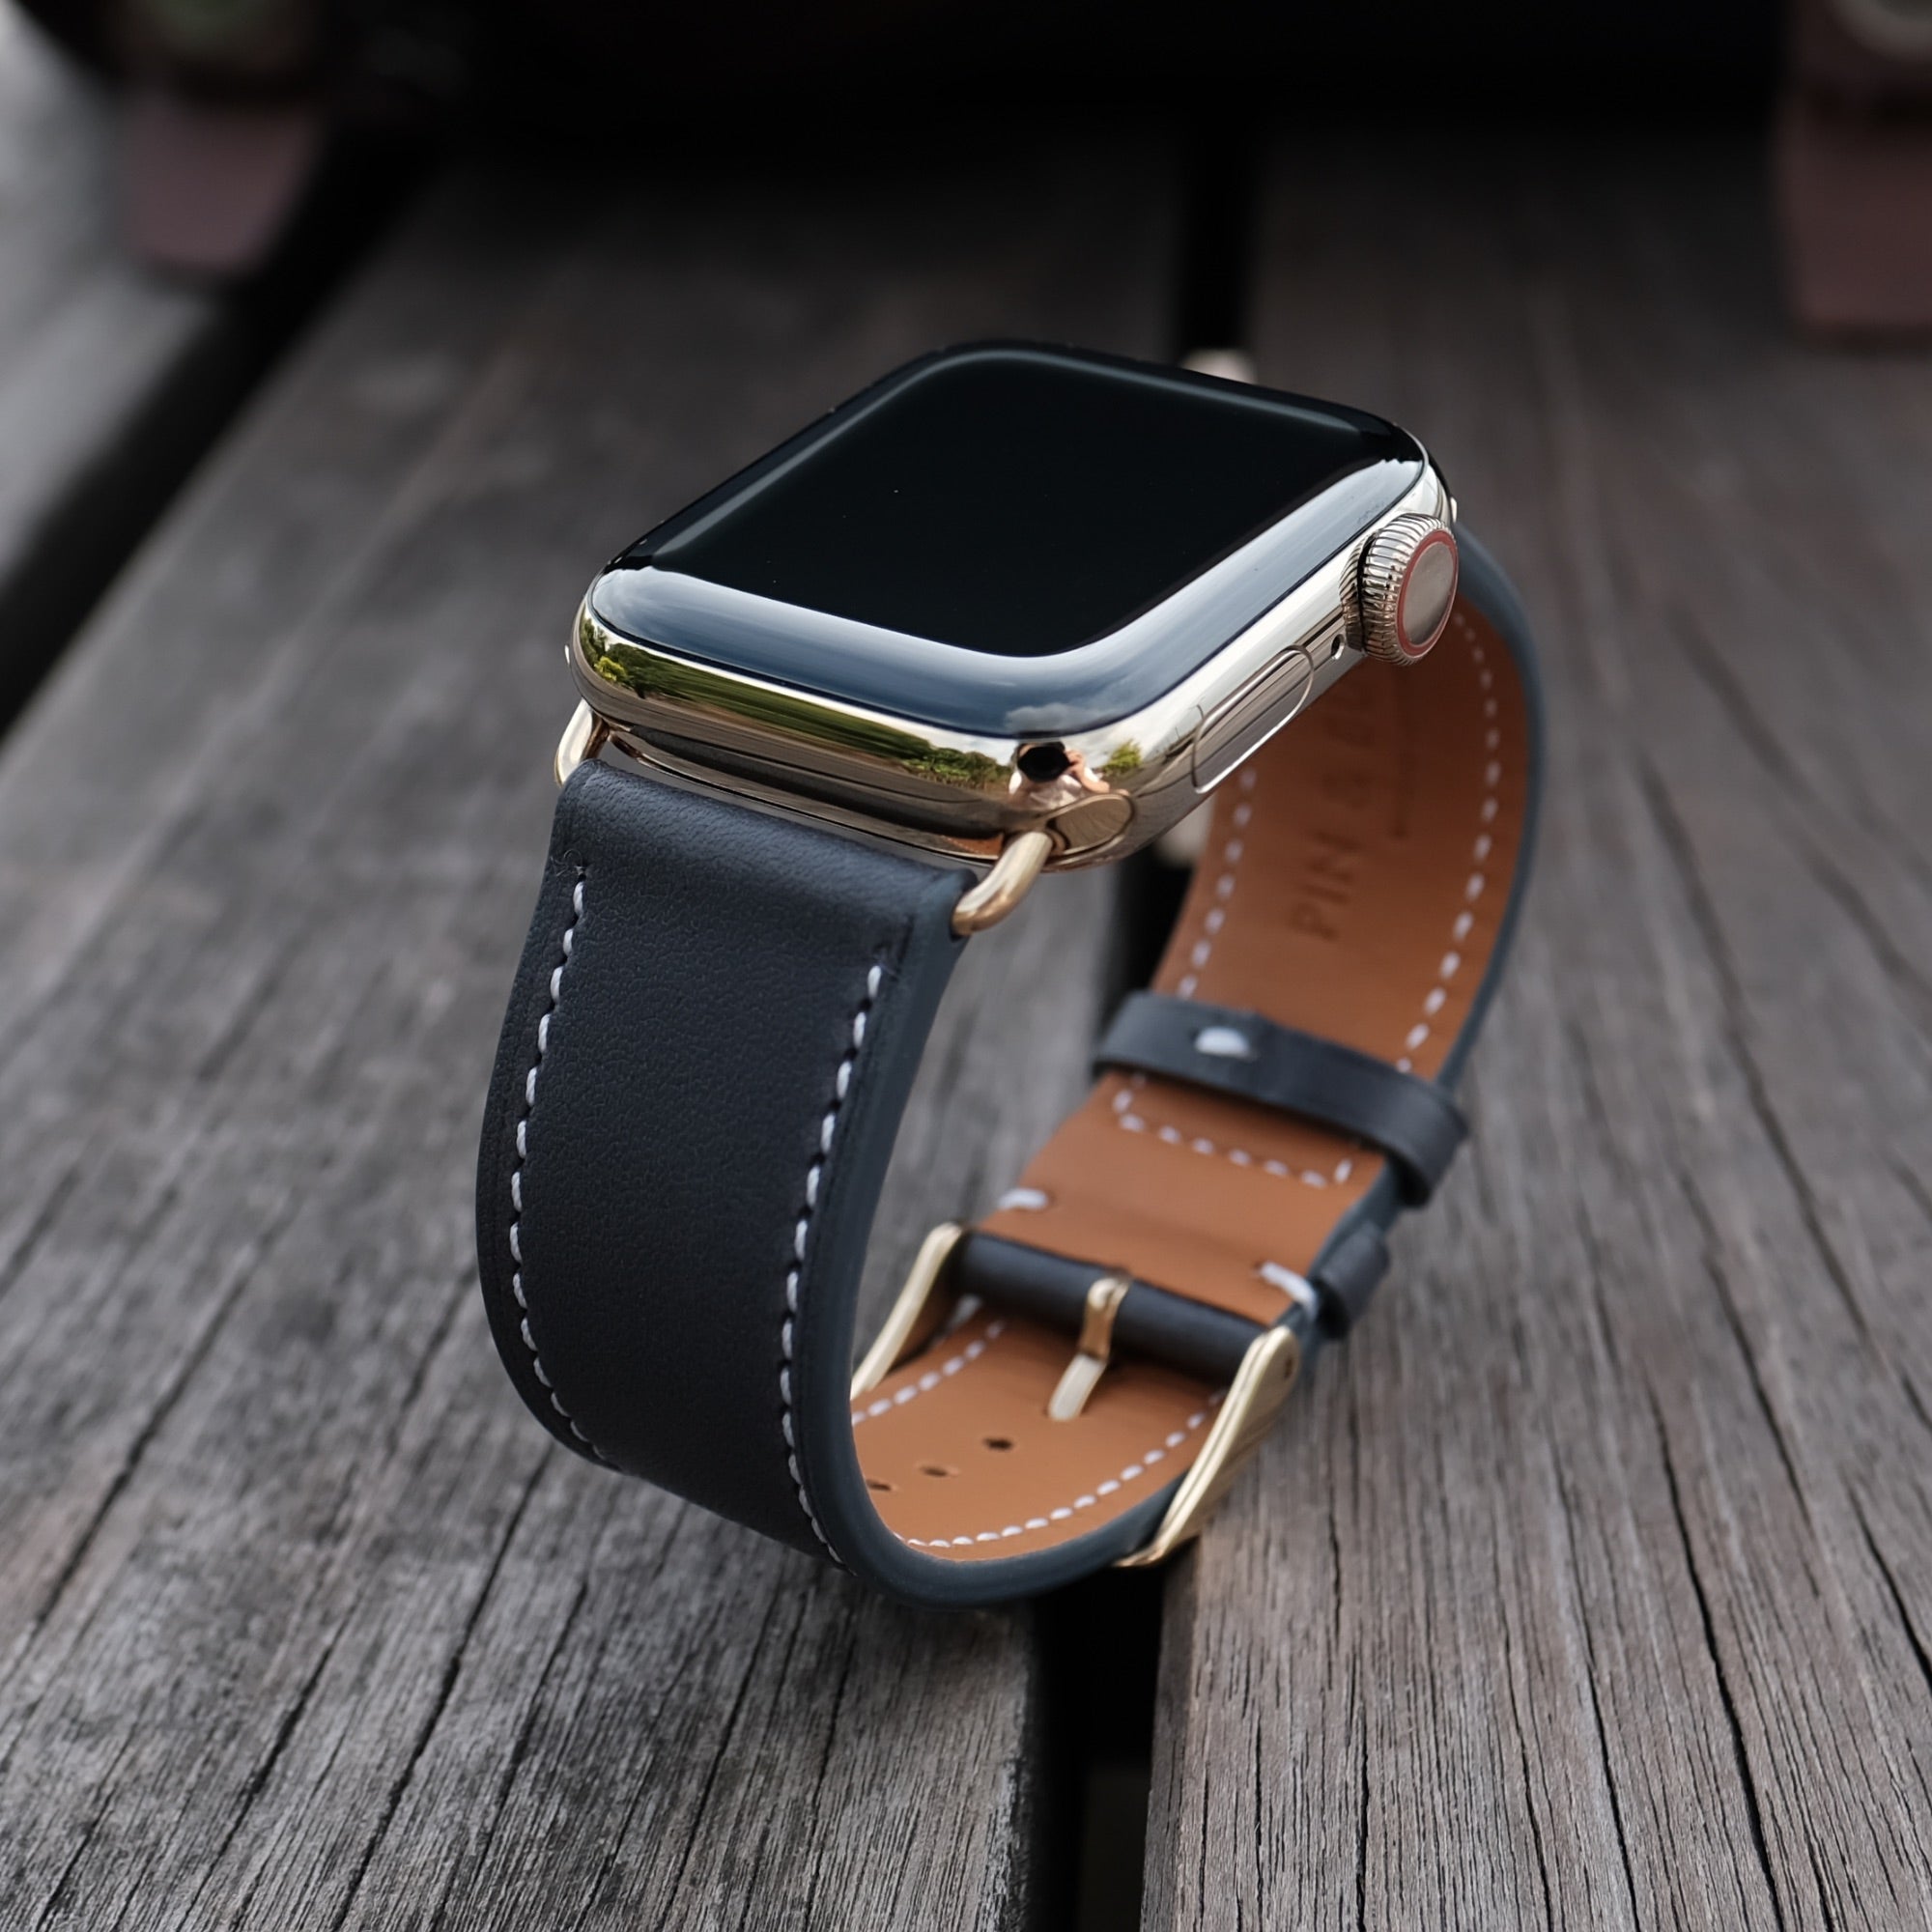 Barenia Leather Apple Watch Bands by Pin & Buckle - Dark Blue - Gold Series 6 and 7 Stainless Steel Hardware